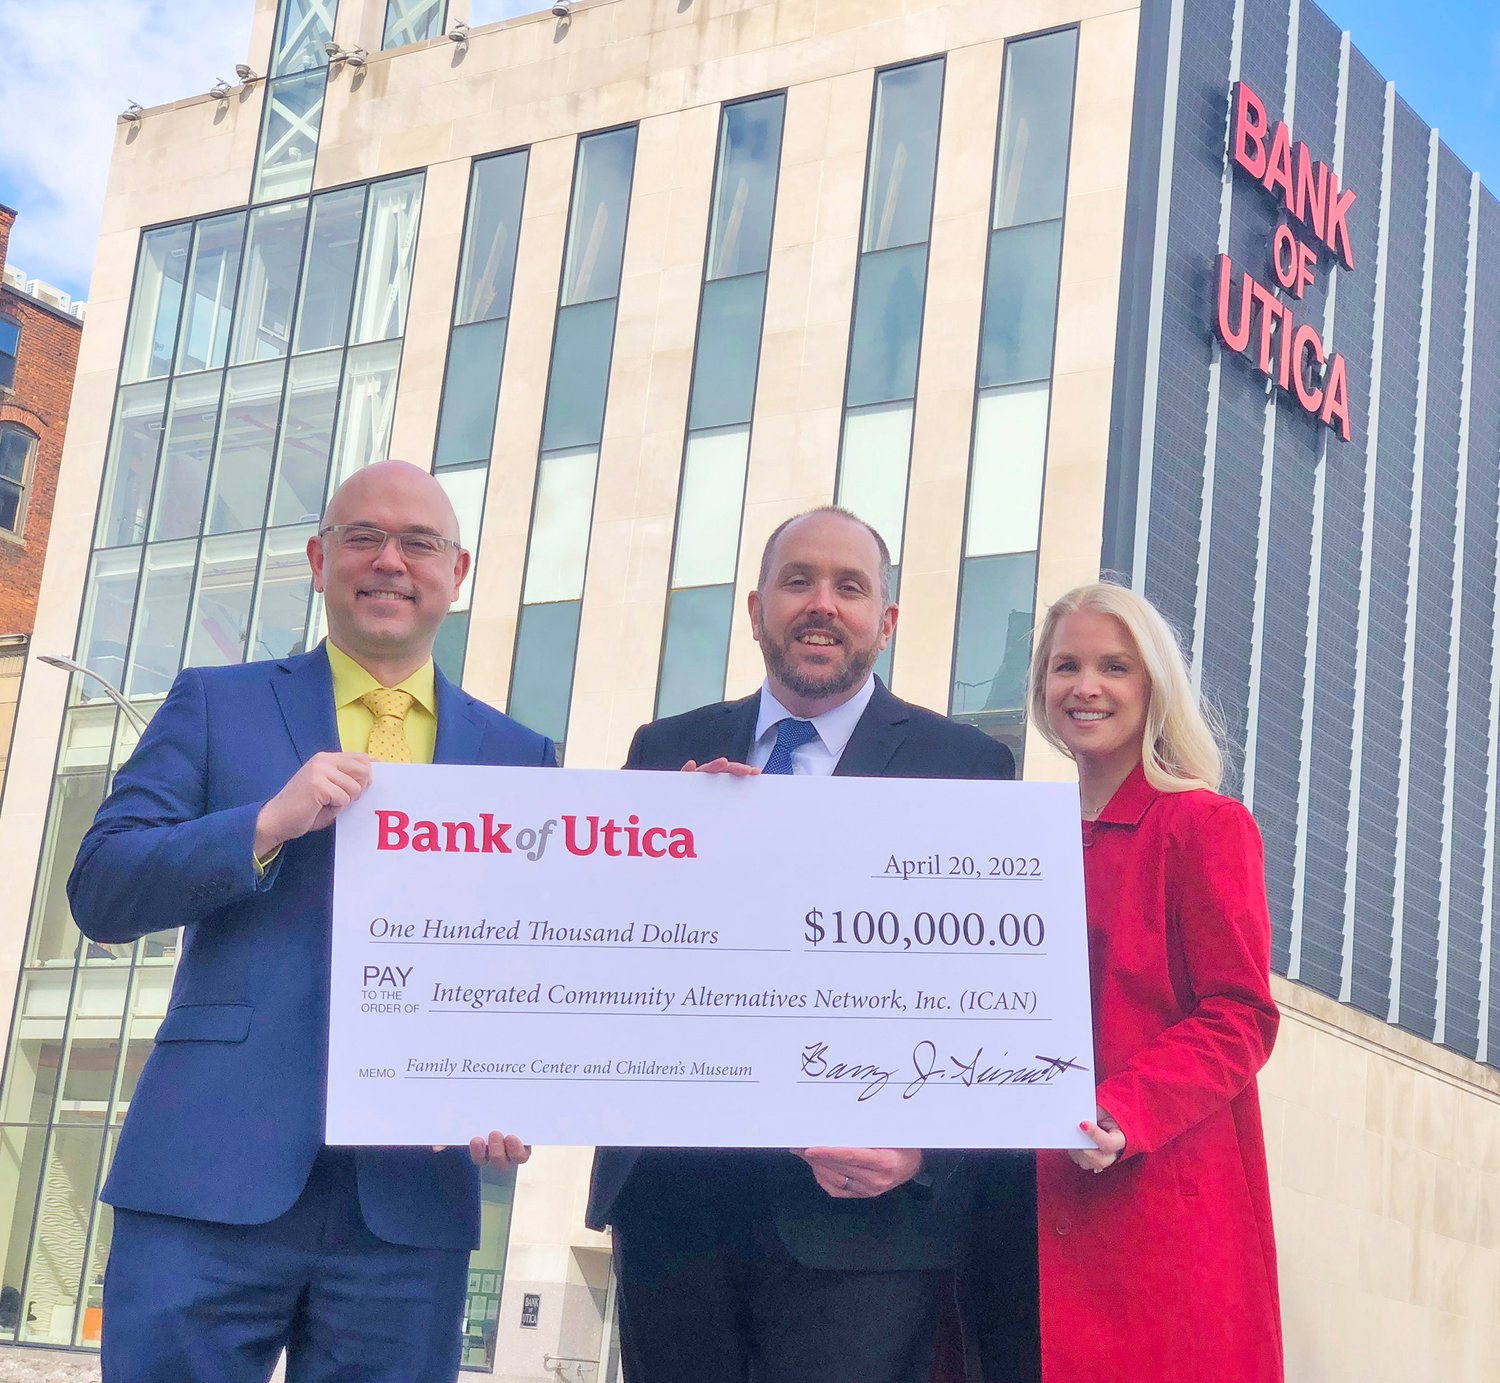 ICAN SUPPORT — The Bank of Utica has committed $100,000 for the Family Resources Center/Children’s Museum project at 106 Memorial Parkway. From left: Barry Sinnott, Bank of Utica senior vice president; Steven Bulger, ICAN CEO/executive director; and Donna Migliaccio, director of the Utica Children’s Museum.